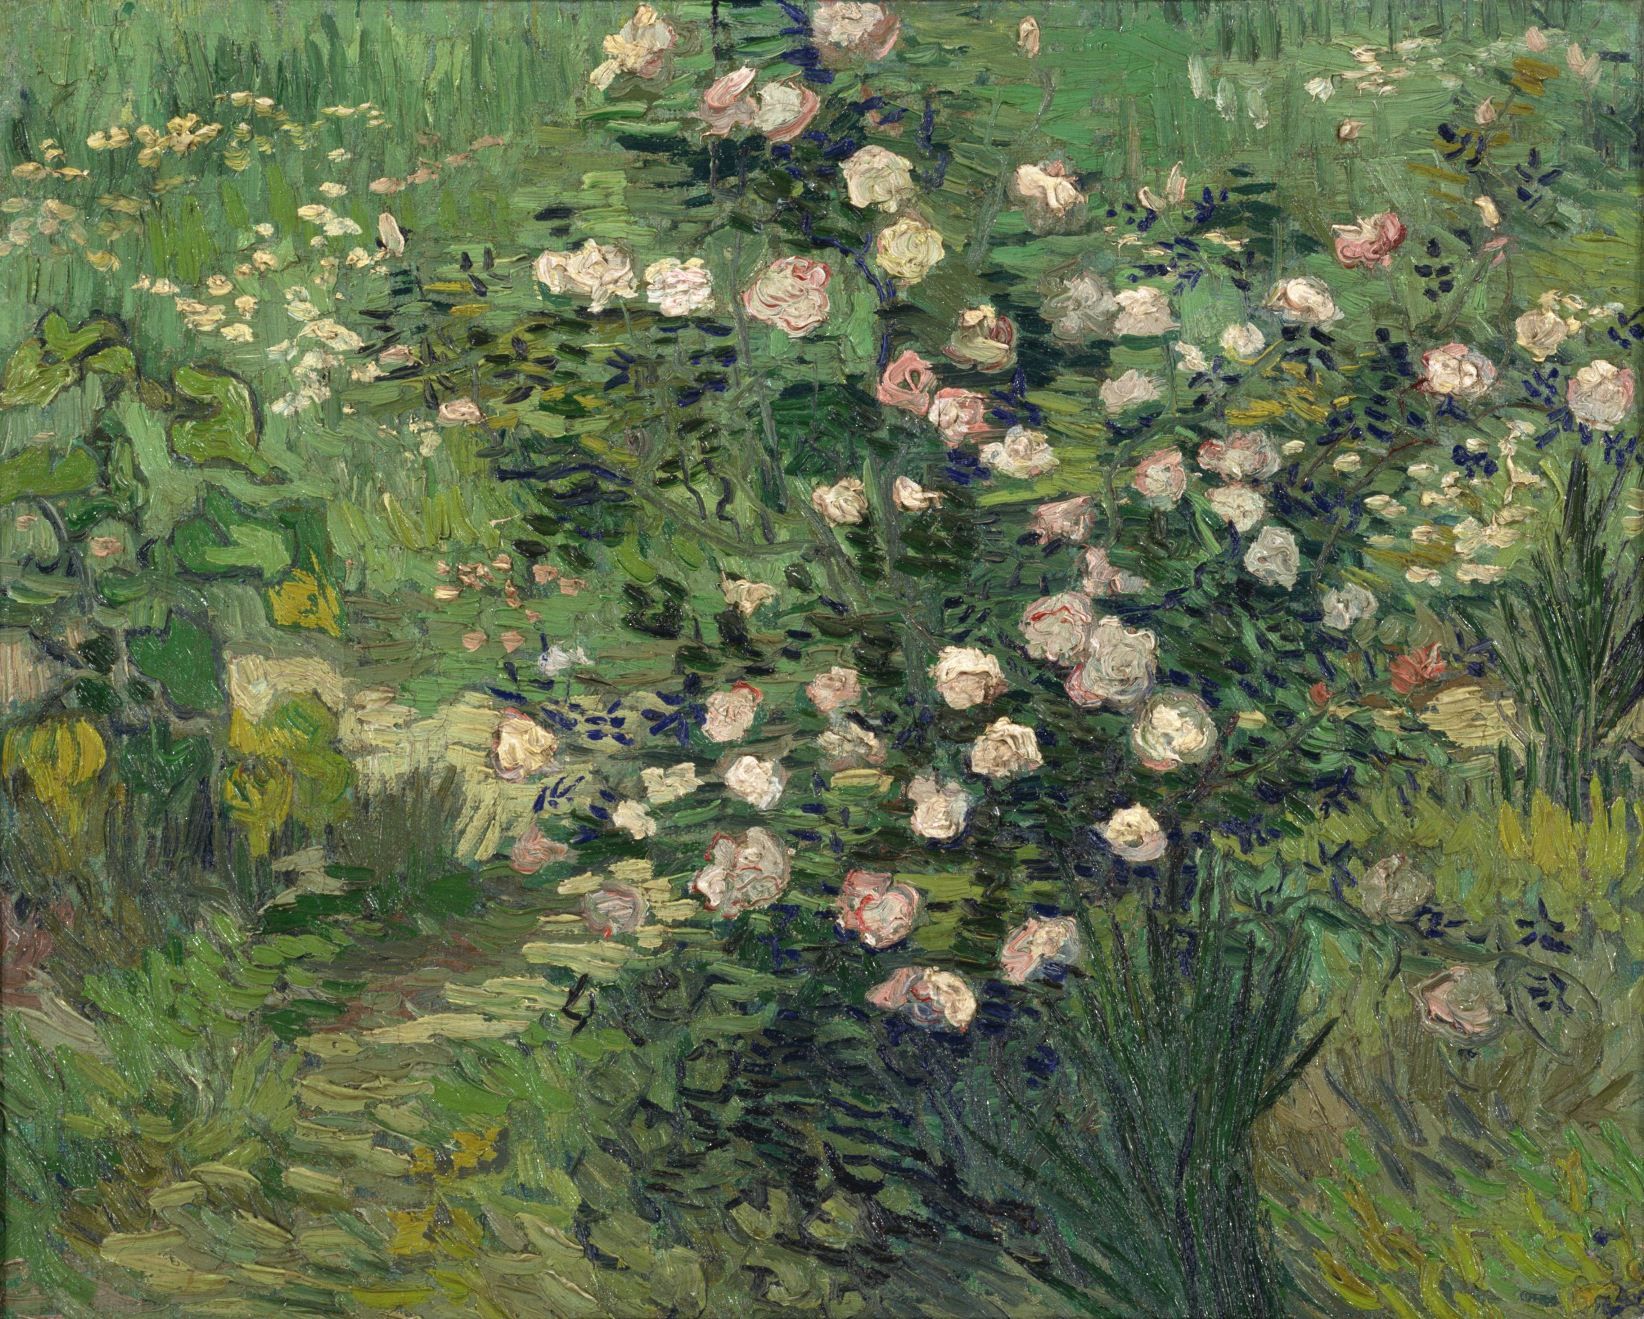 The fate of a Van Gogh flower painting destined for Japan's 'Sheer 